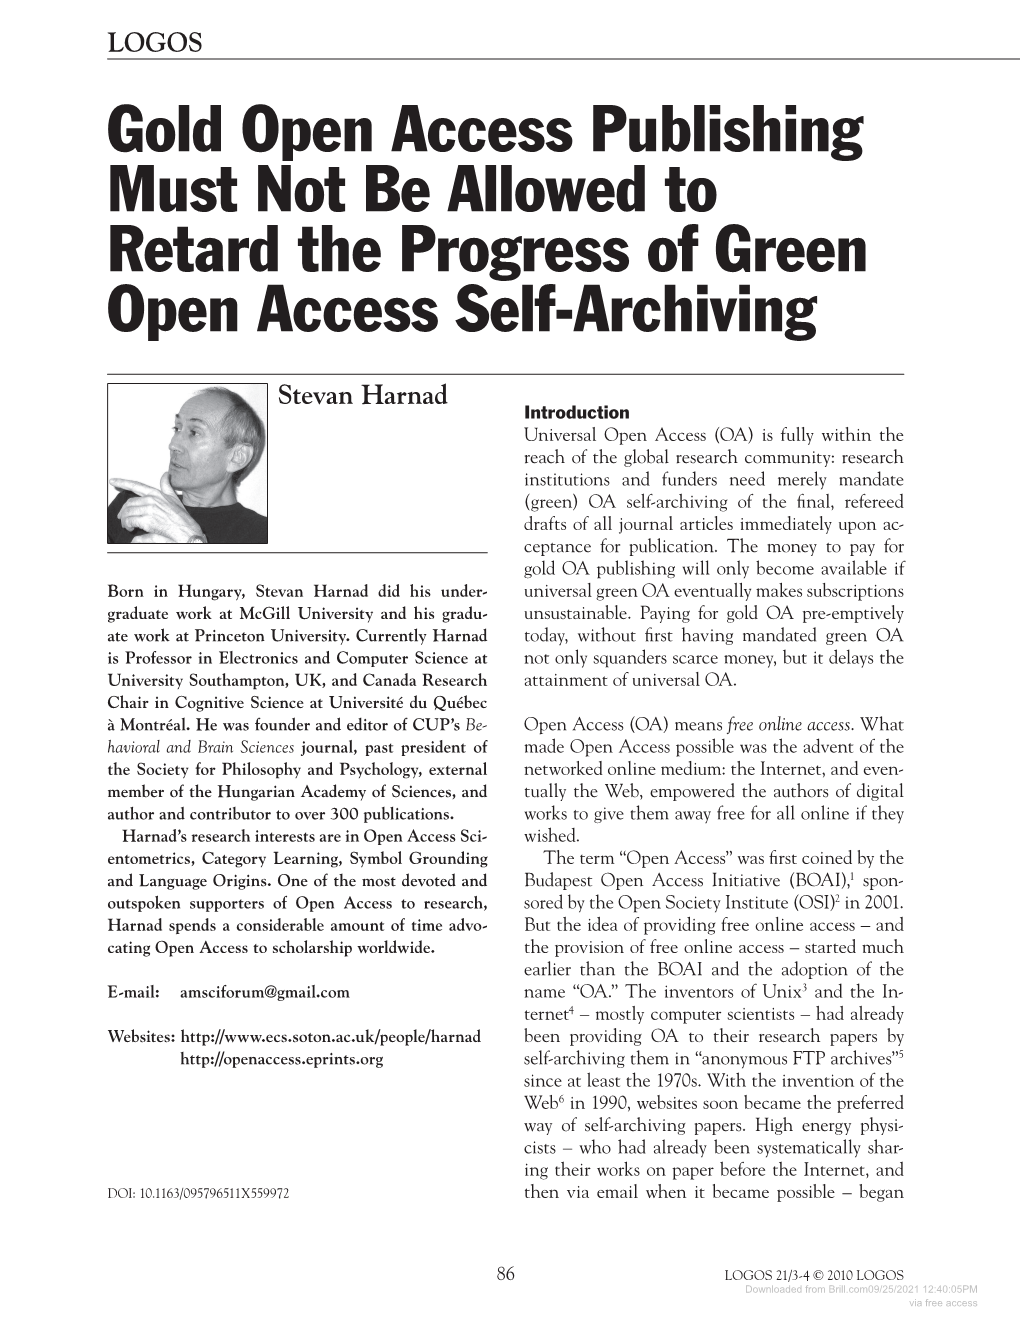 Gold Open Access Publishing Must Not Be Allowed to Retard the Progress of Green Open Access Self-Archiving